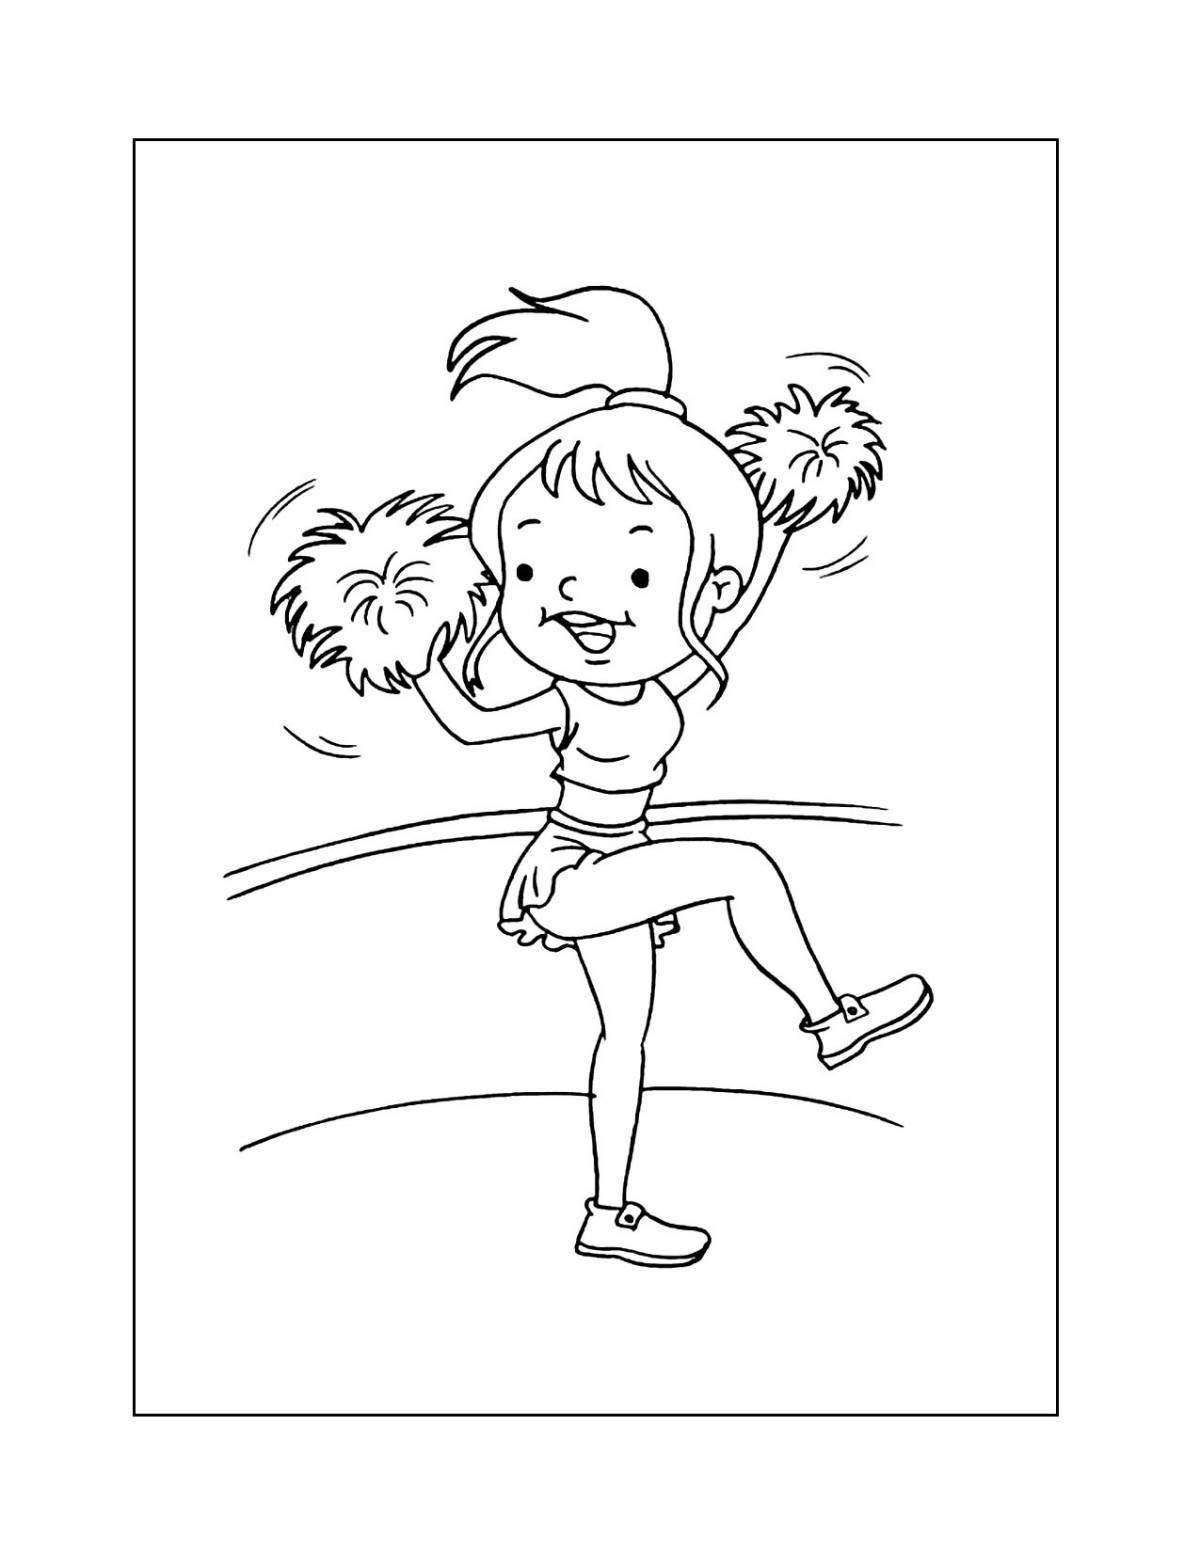 Coloring book stimulating exercise